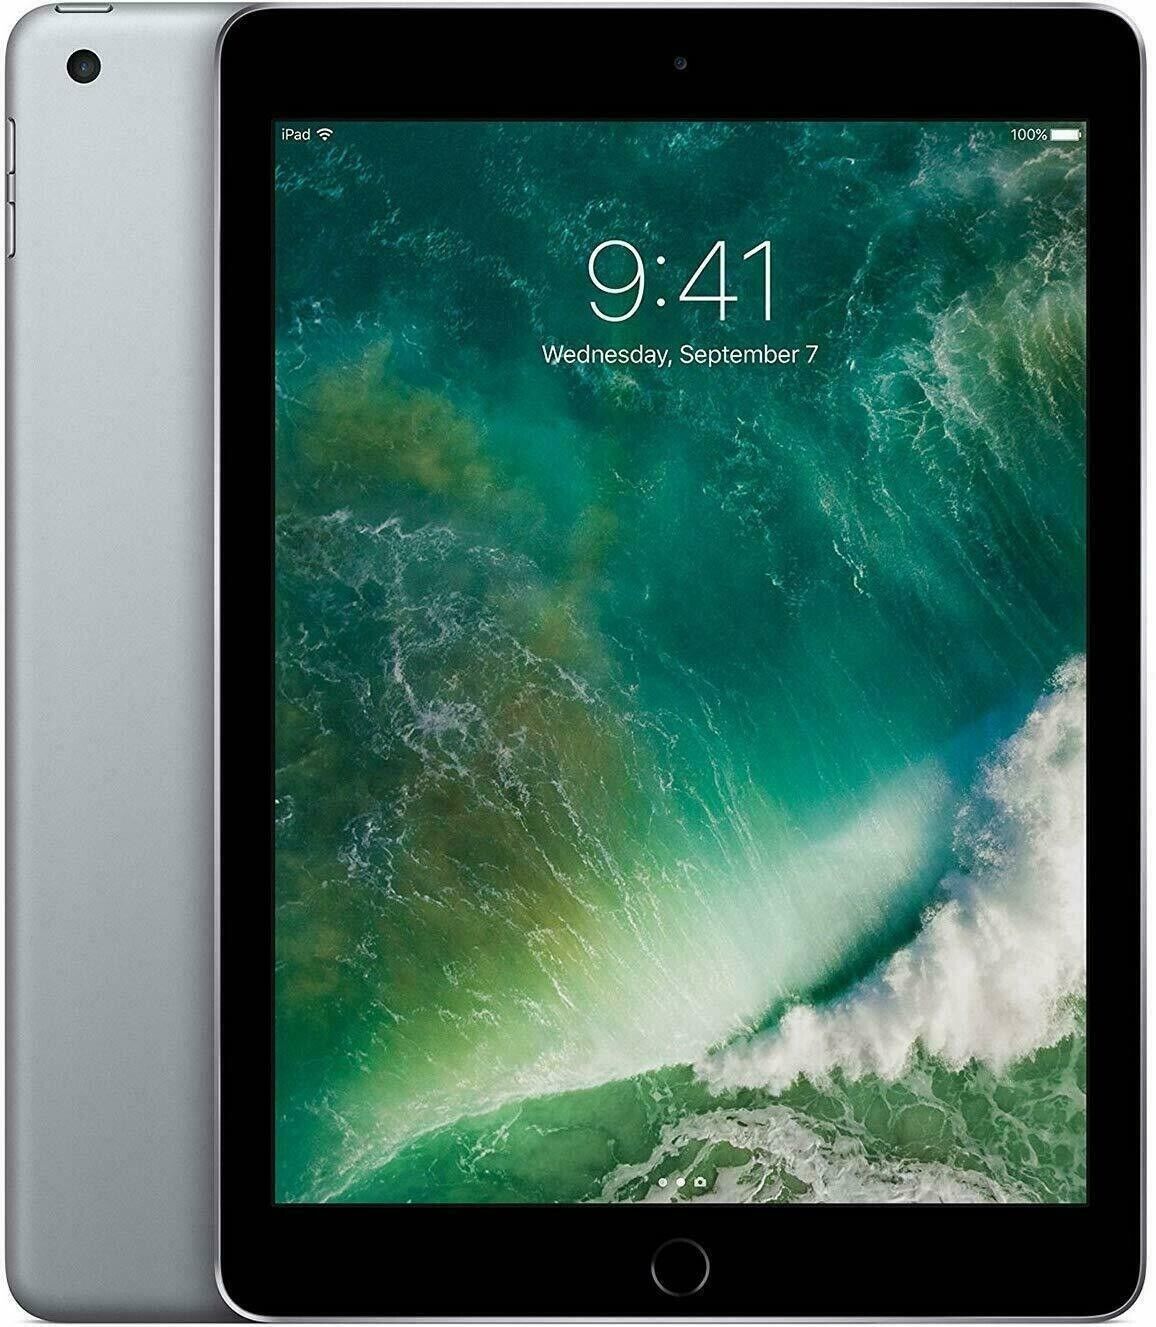 Apple iPad Air 2 16GB, Wi-Fi, 9.7in - Space Gray for sale online 